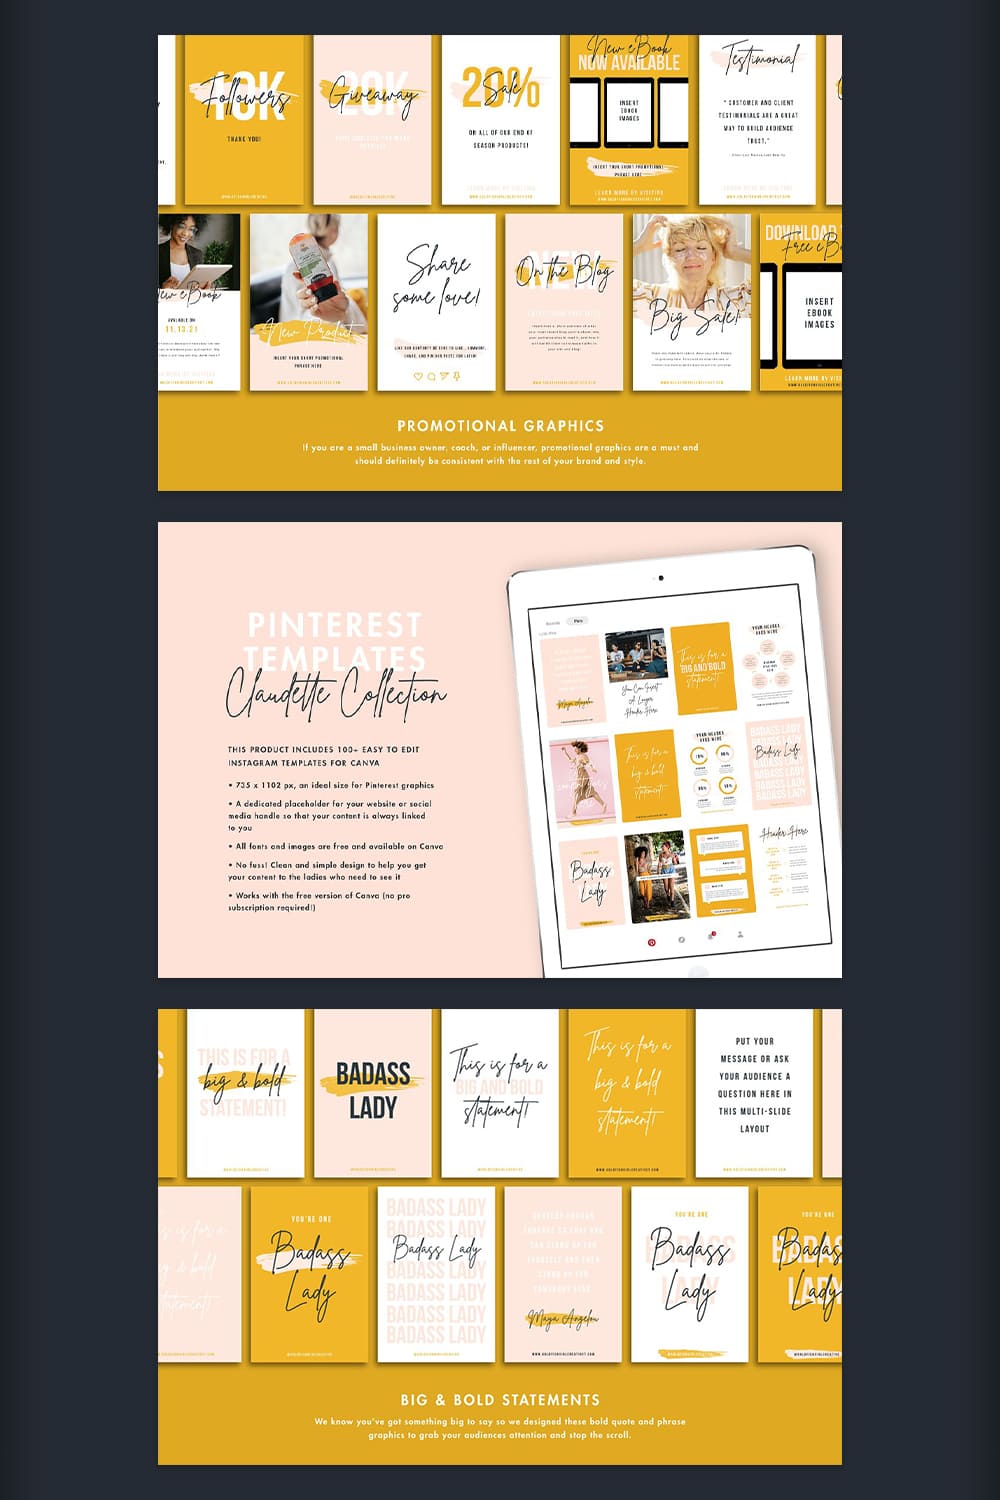 Bright Pinterest template in yellow.